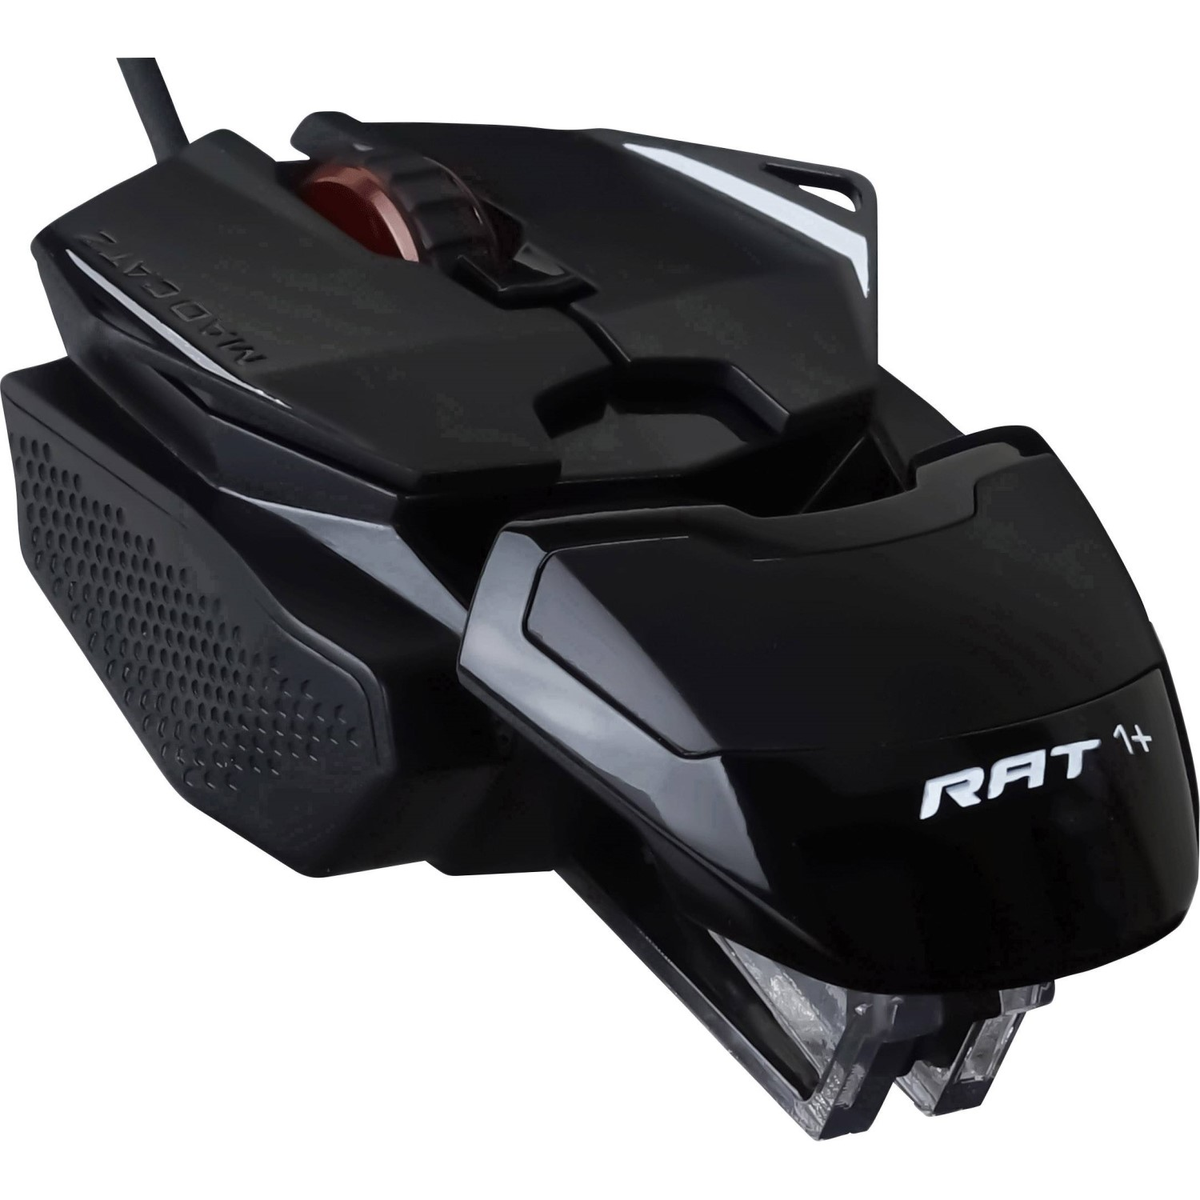 MAD CATZ MR01MCINBL000-0 R.A.T. 1+ GAMING Schwarz OPTICAL Gaming MOUSE, Maus, BL